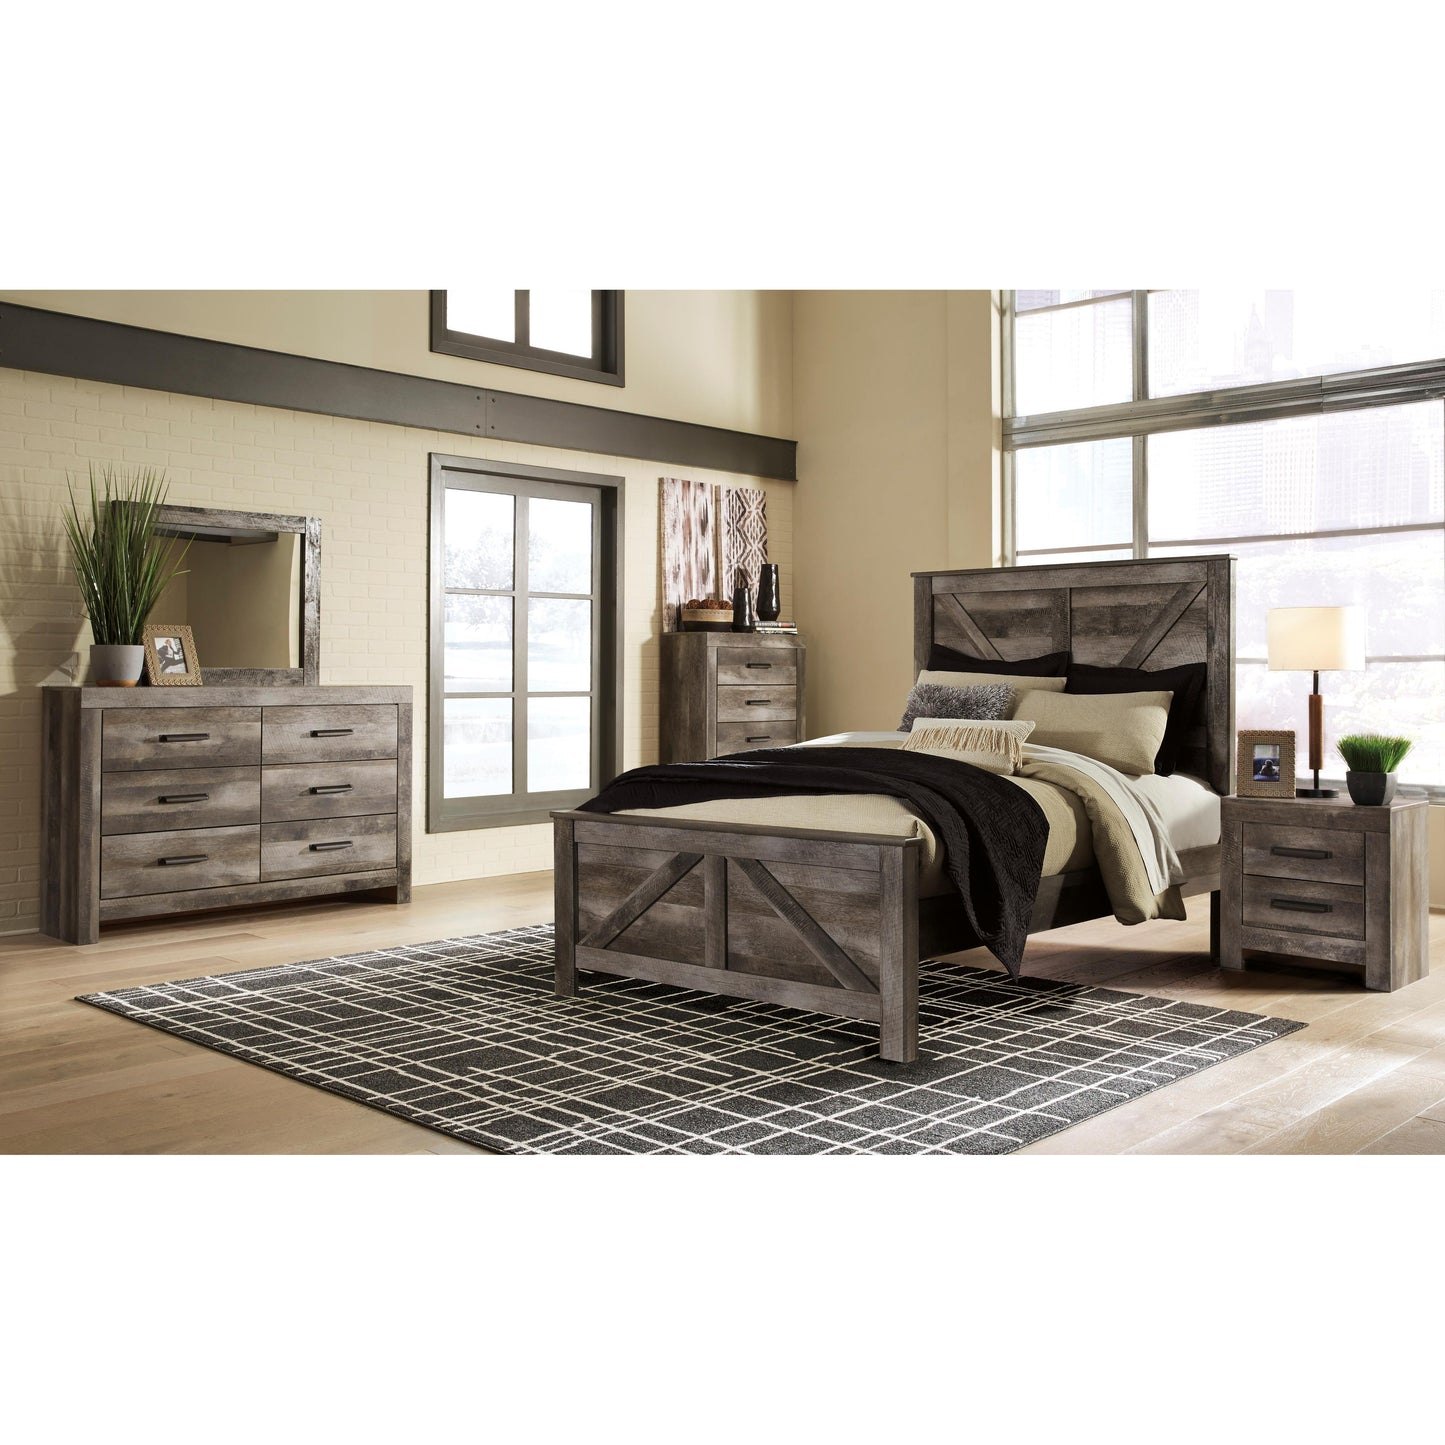 Signature Design by Ashley Wynnlow B440 5 pc Queen Crossbuck Panel Bedroom Set IMAGE 1